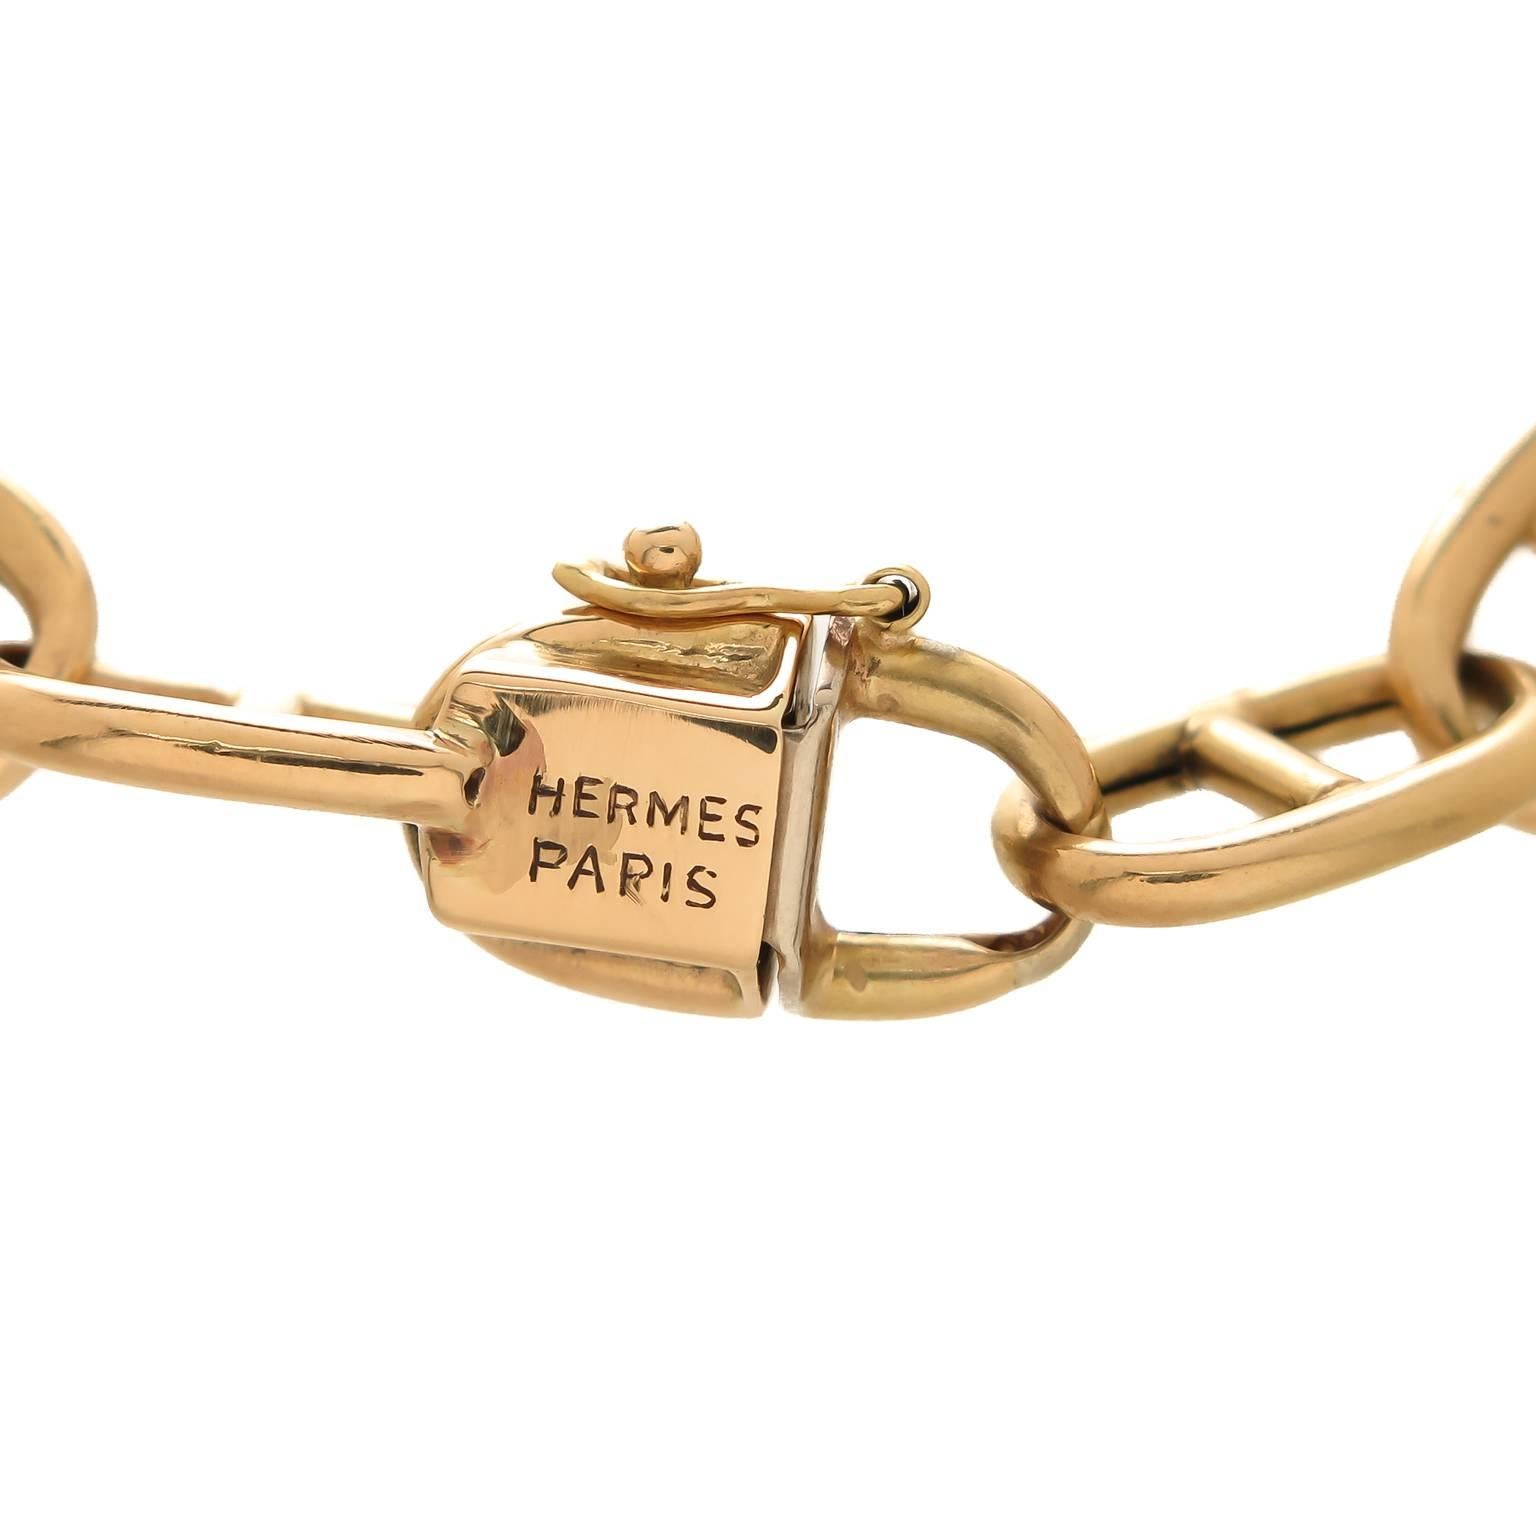 Circa 1960s Hermes Paris, 18K yellow Gold Anchor Link Bracelet, measuring 7 3/4 inch in length and 5/16 inch wide. Solid links, tongue clasp with a safety and a Cabochon Sapphire push piece. Signed and bearing French Hall Mark. 